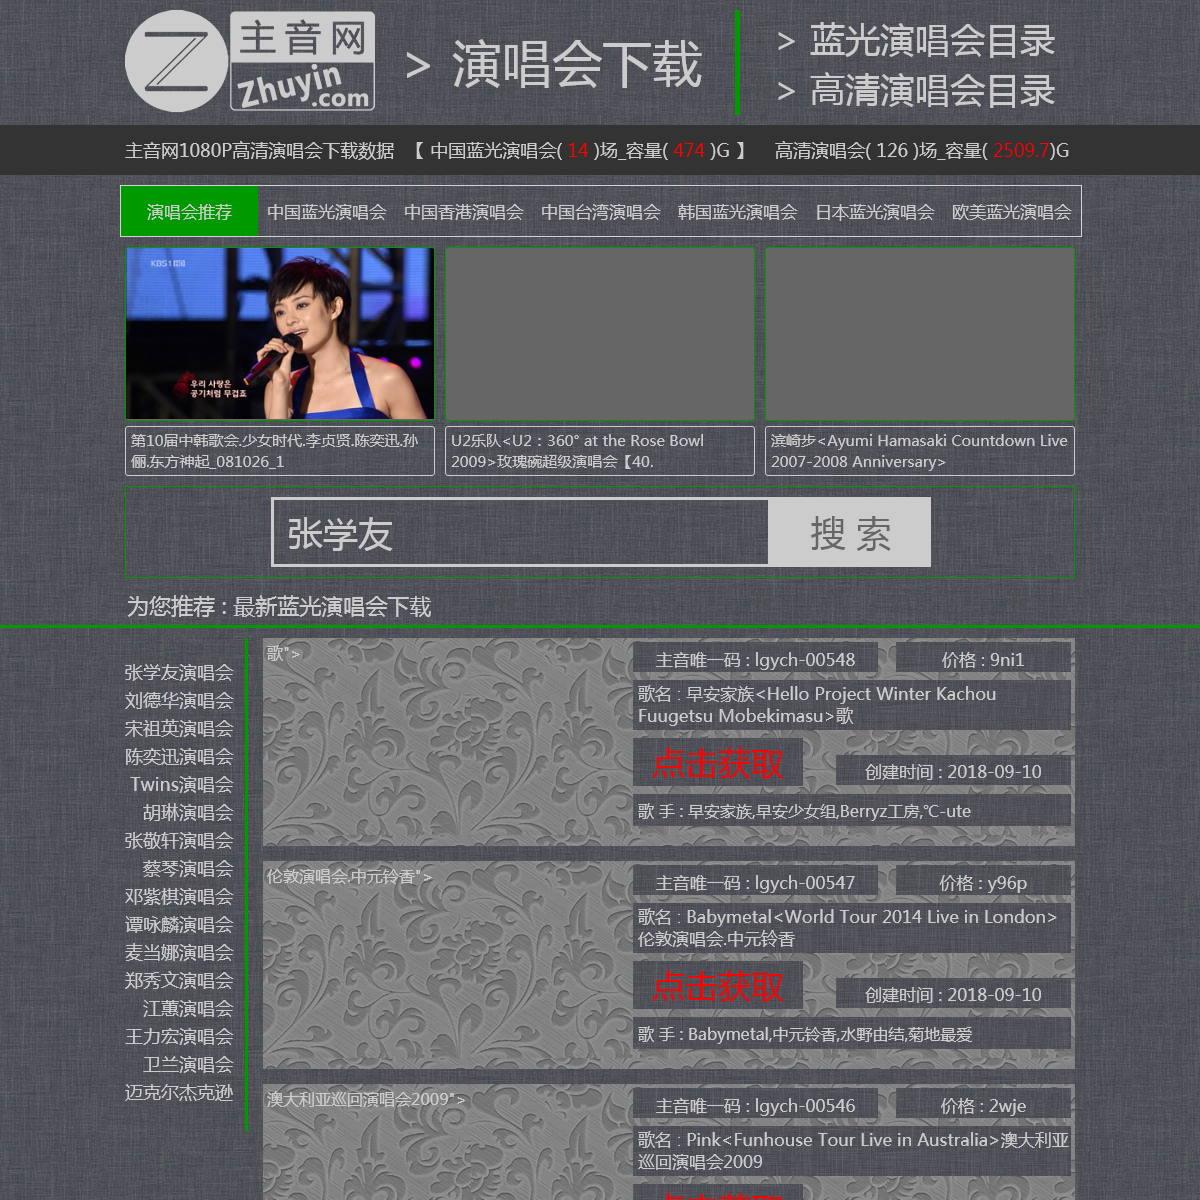 A complete backup of zhuyin.com